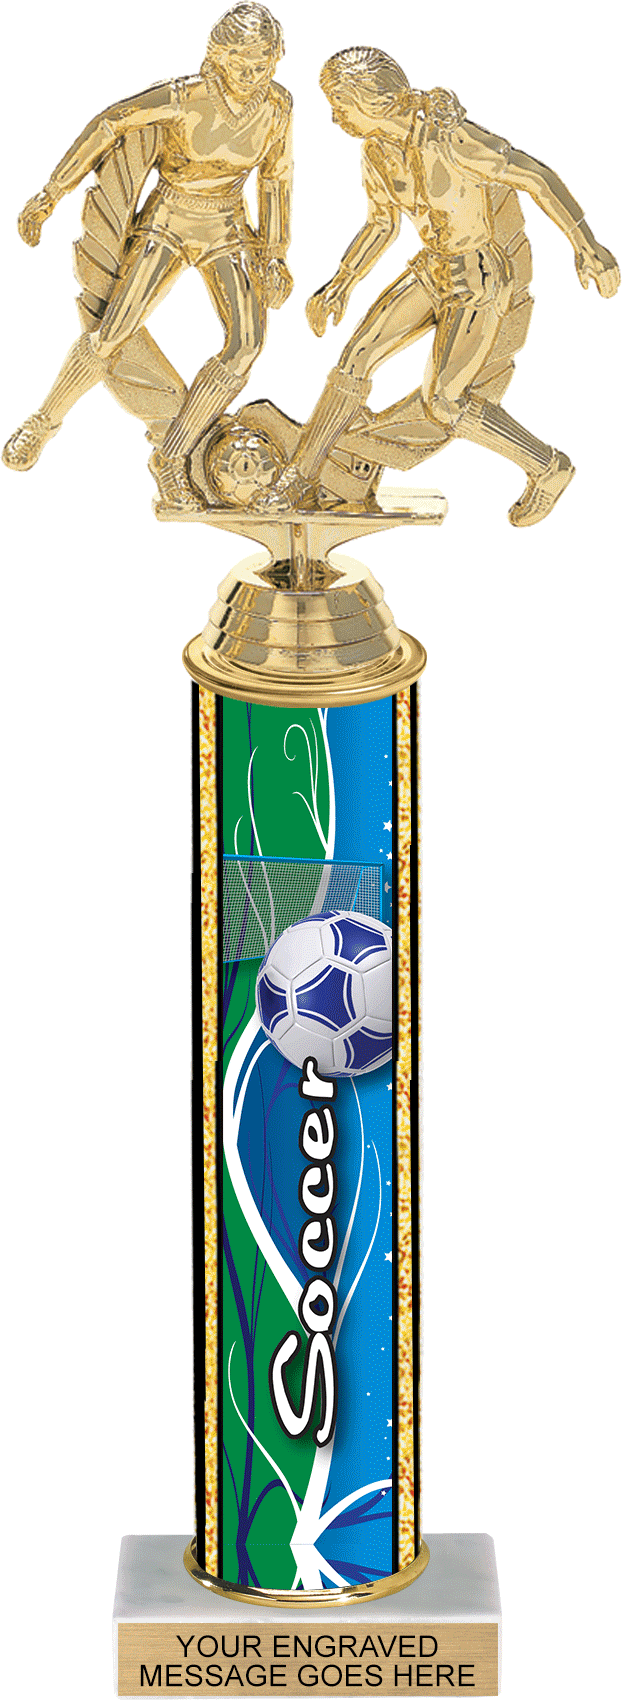 Glow in the Dark Exclusive Soccer Ultra-Wave Column Trophy - 14 inch